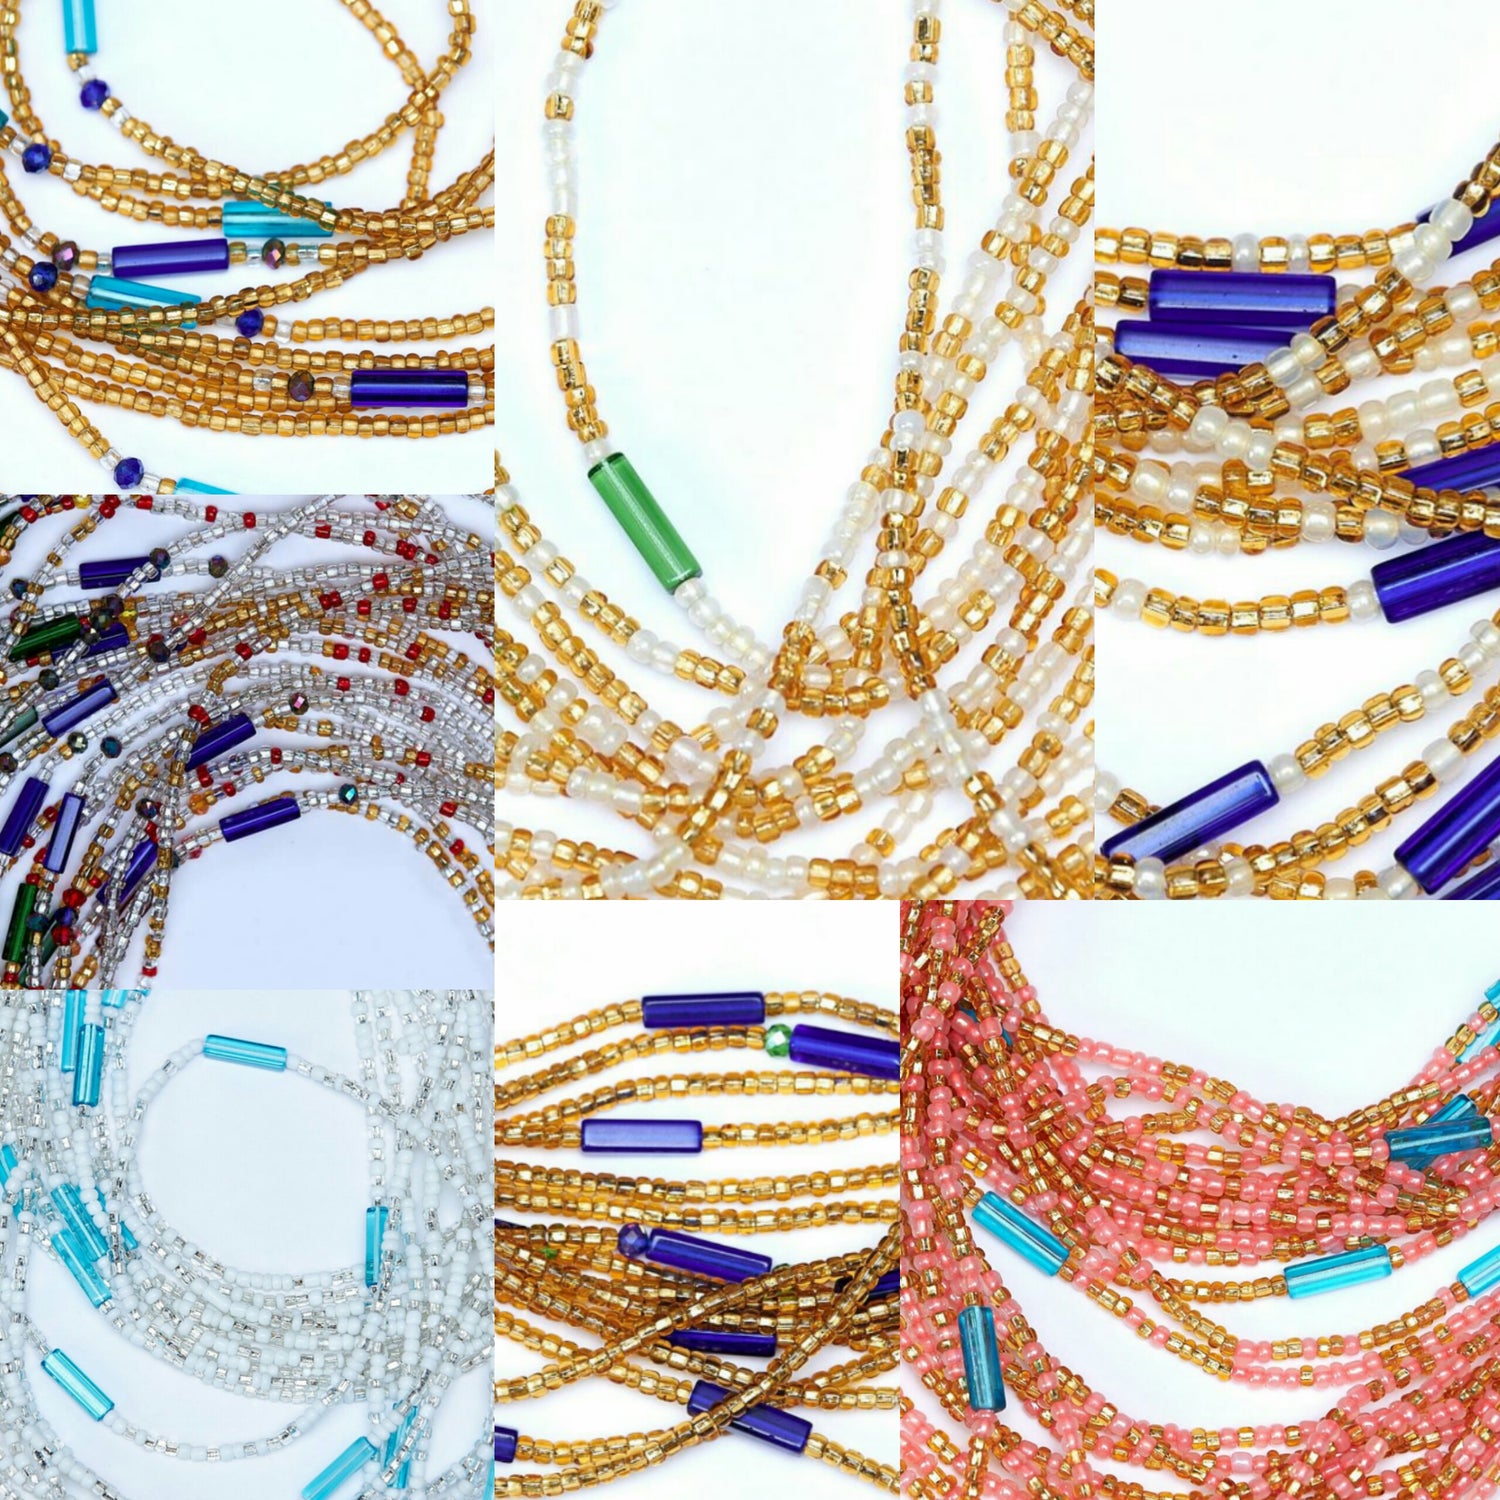 7 Colored Waist Beads Including 45 Inches Wine and Clear Crystal Tie on Waist Beads, 45 Inches Silver And White Beads With Sea Blue Pebble Bar Tie On Waist Beads And 44 Inches Gold Beads With Deep Blue Pebble Bars Tie on Waist Beads